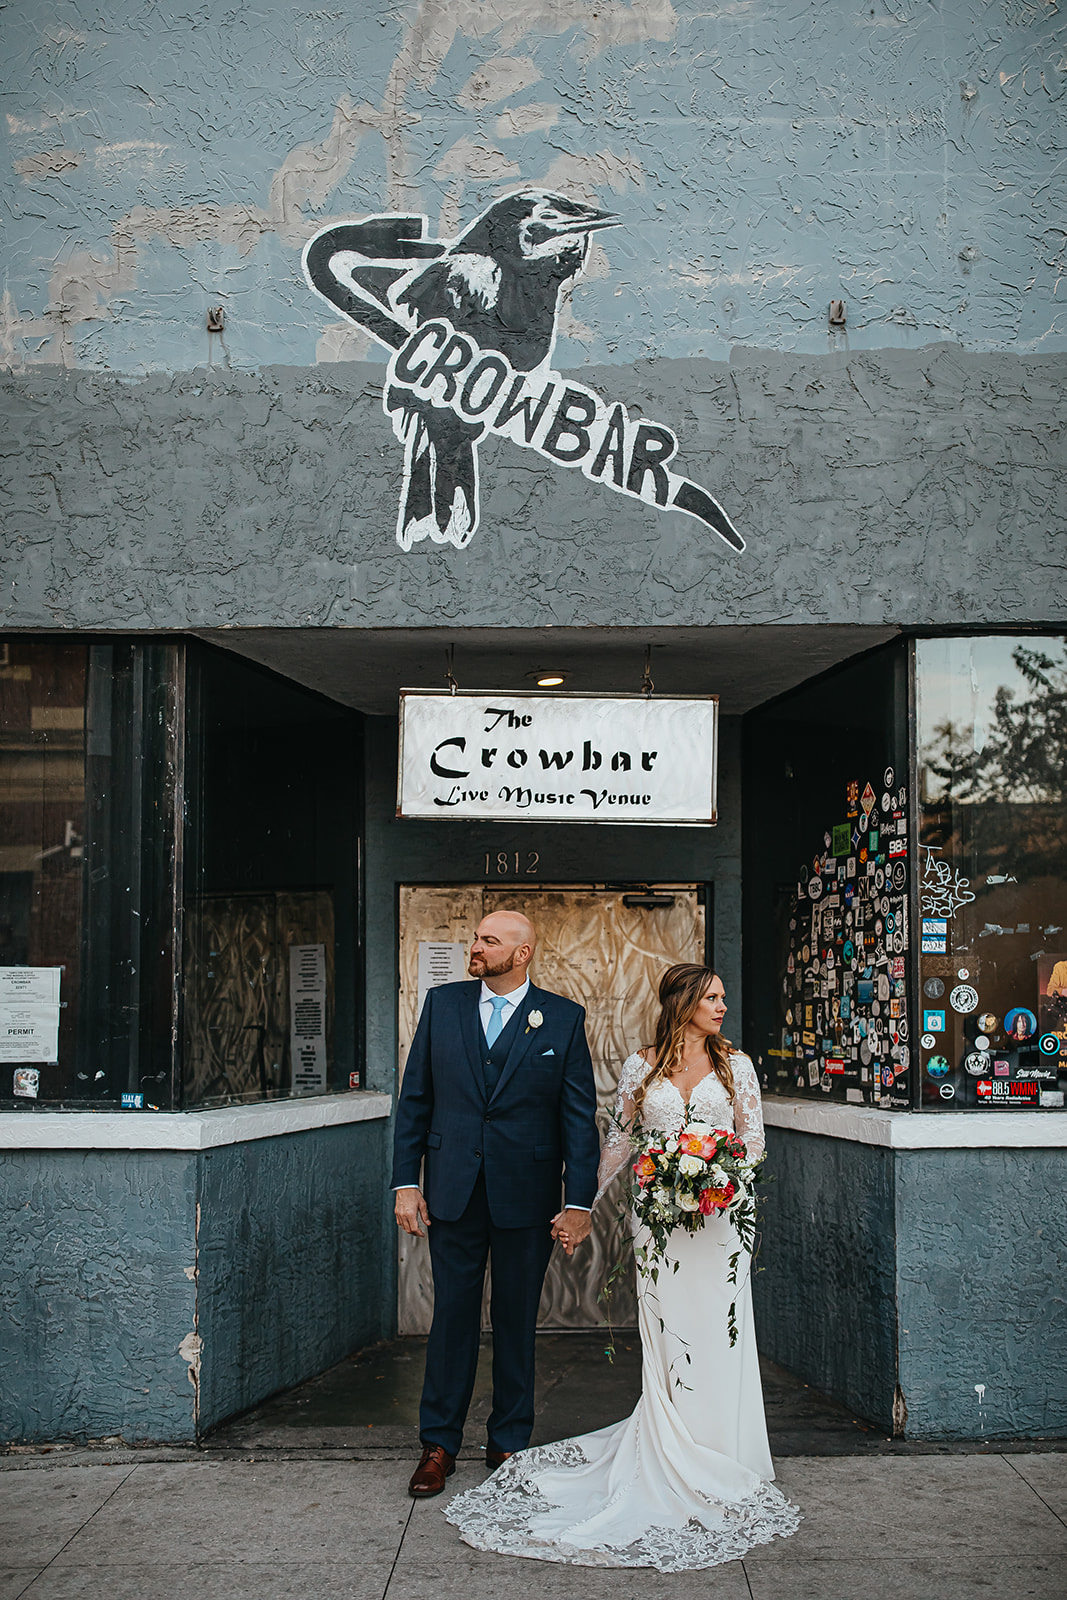 Ybor City Tampa Wedding Bride and Groom Outdoor Urban Bar Portrait | Long Sleeve Lace Bridal Gown Wedding Dress | Classic Navy Blue Groom Suit | Organic Natural Loose Wedding Bridal Bouquet with Coral Pink Peonies and White Roses with Succulents and Eucalyptus Greenery by Tampa Florida Monarch Events and Designs